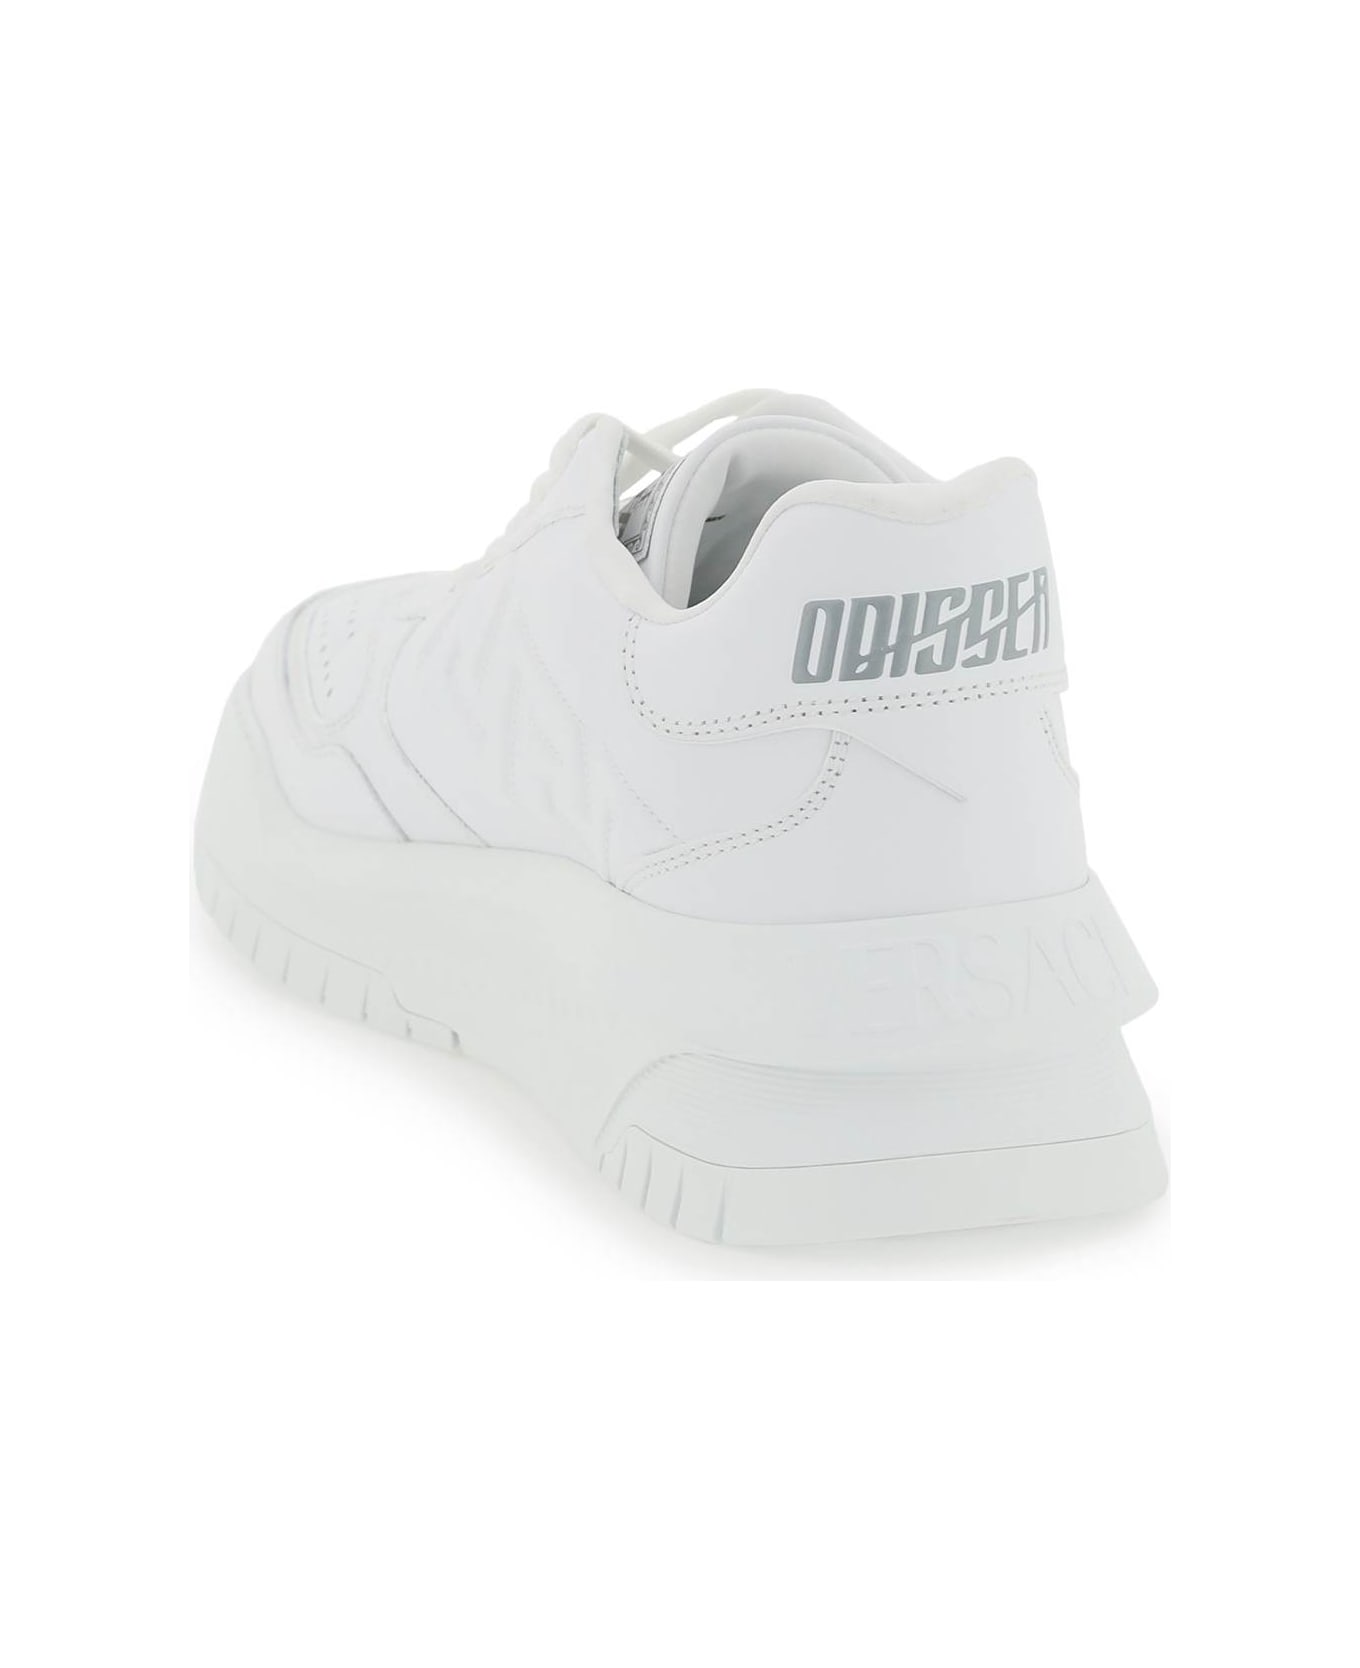 Versace 'odissea' Sneakers - White